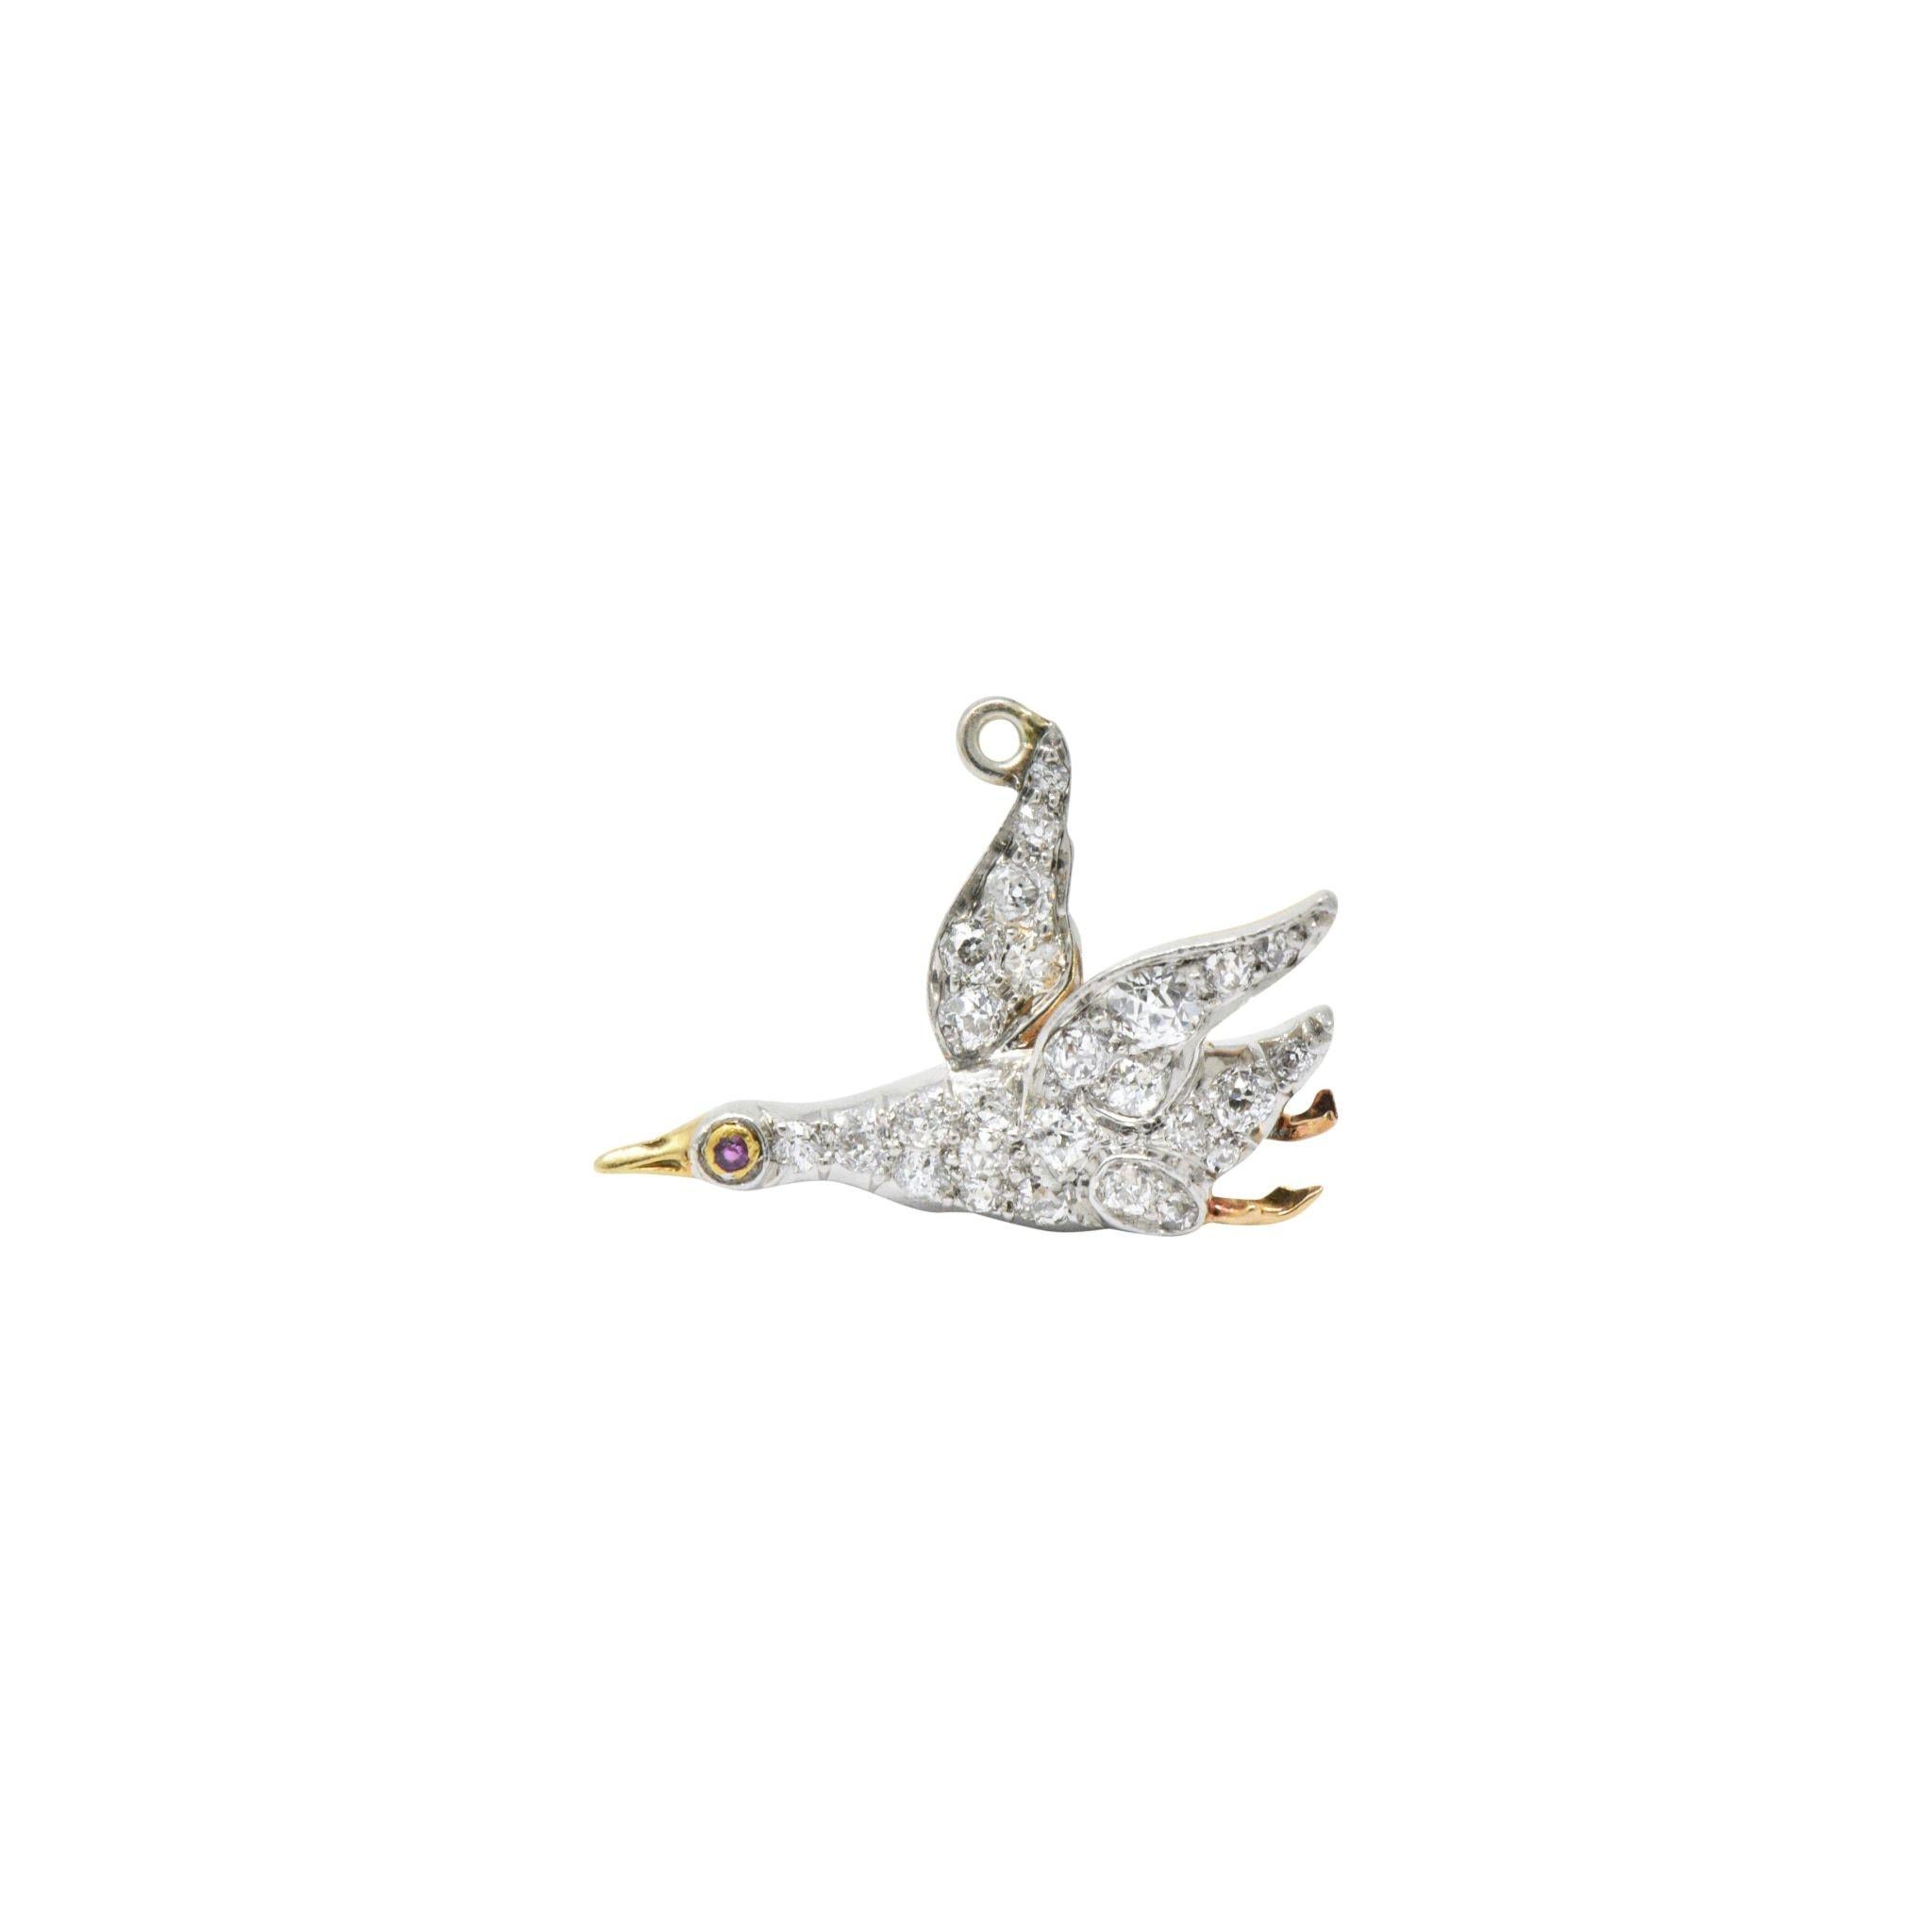 Designed as an adorable bird, mid-flight with pavé set old mine and Swiss cut diamonds, approximately 0.40 carats total, G-H color, VS to I clarity
Sweet details like a single cut ruby eye and yellow gold beak and feet
Late Victorian period
Length: